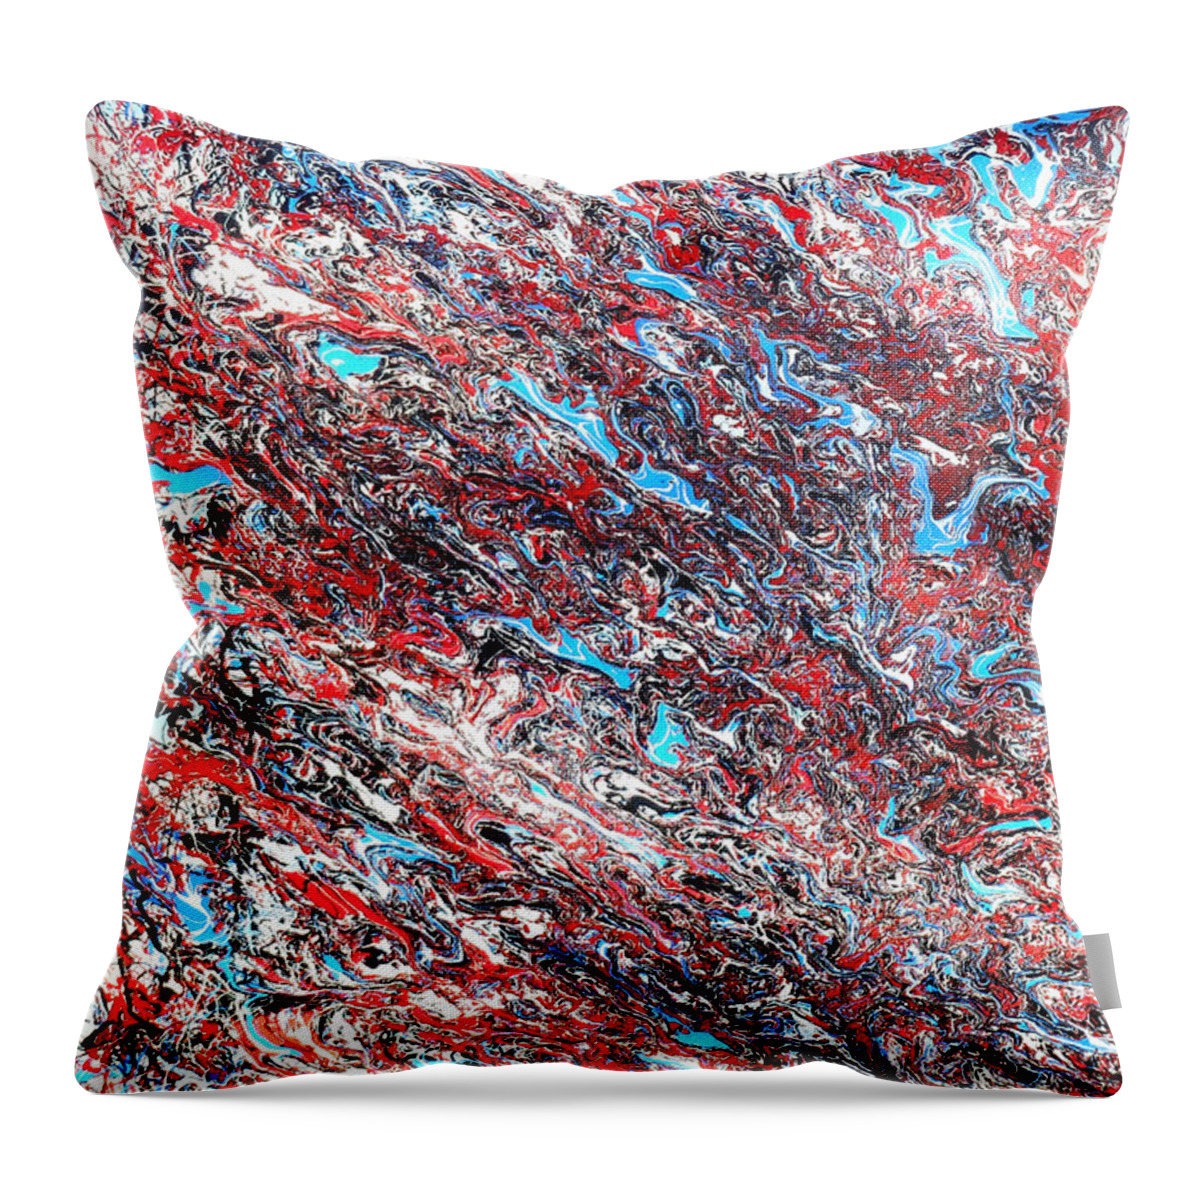 Drip Abstract Throw Pillow featuring the painting Red White Blue and Black Drip Abstract by Genevieve Esson